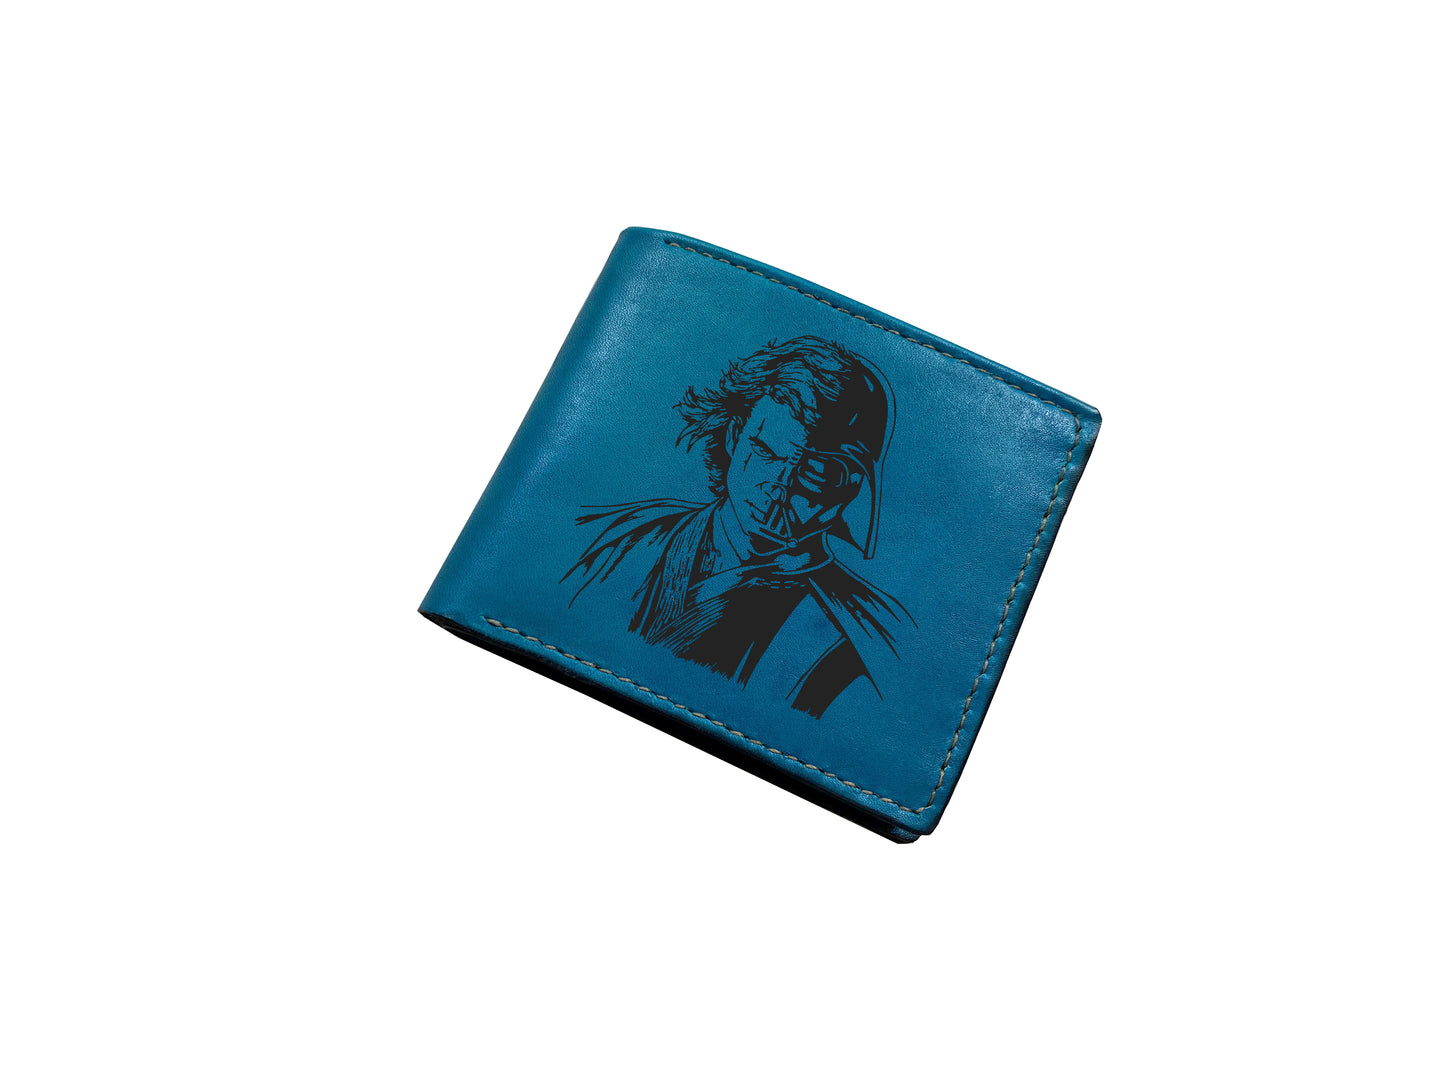 Leather anniversary present ideas for hiim, Starwars characters drawing art wallet, cool wallet for husband from wife